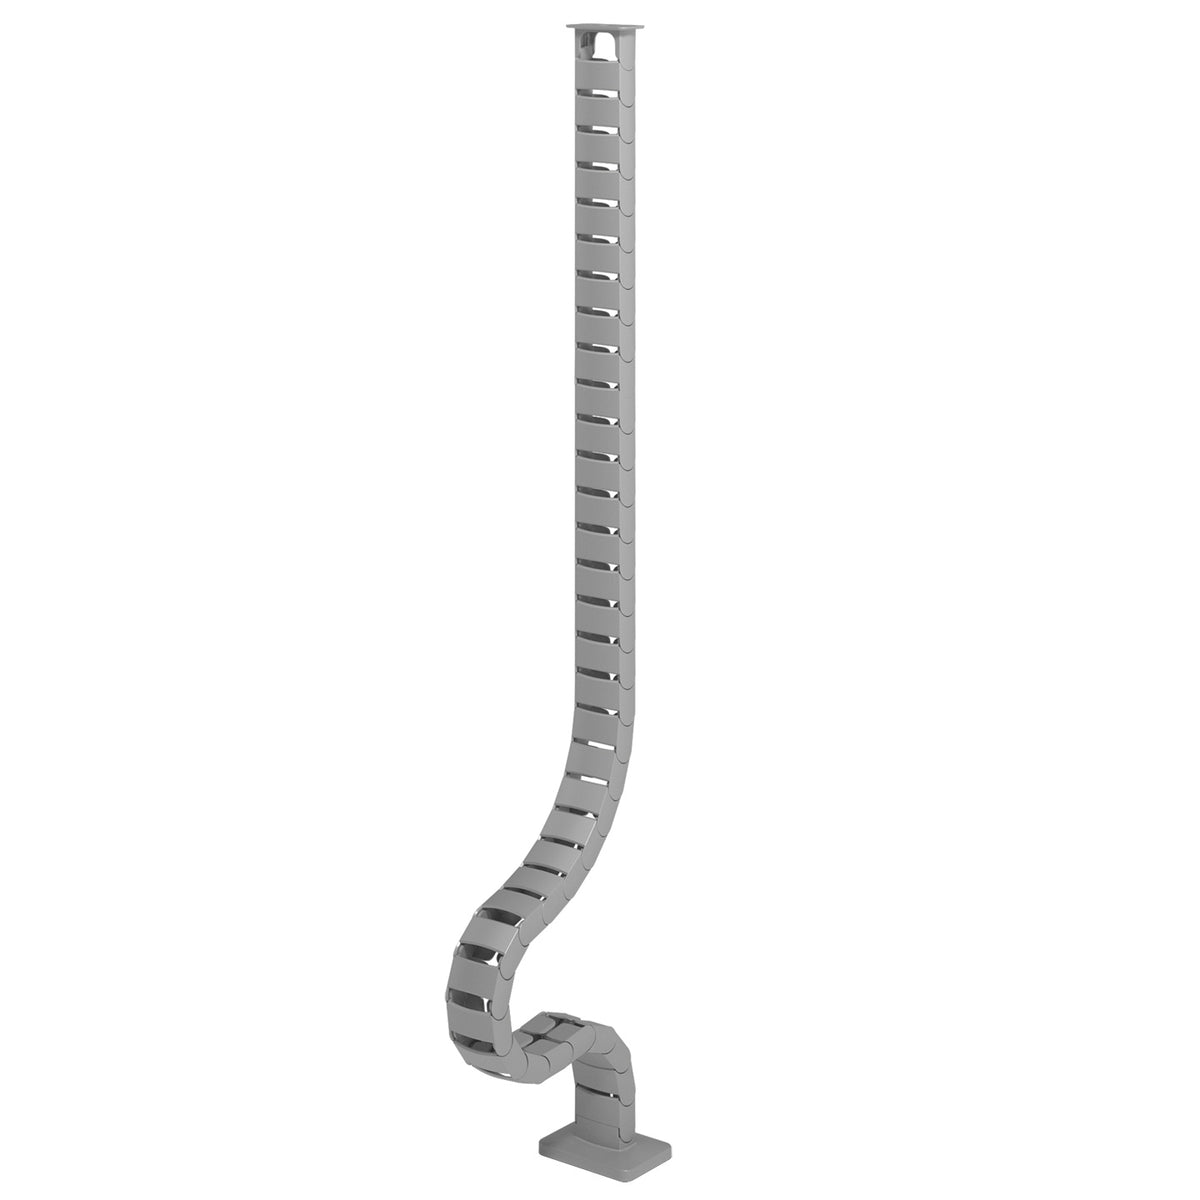 Addit cable guide sit-stand 130 cm - desk